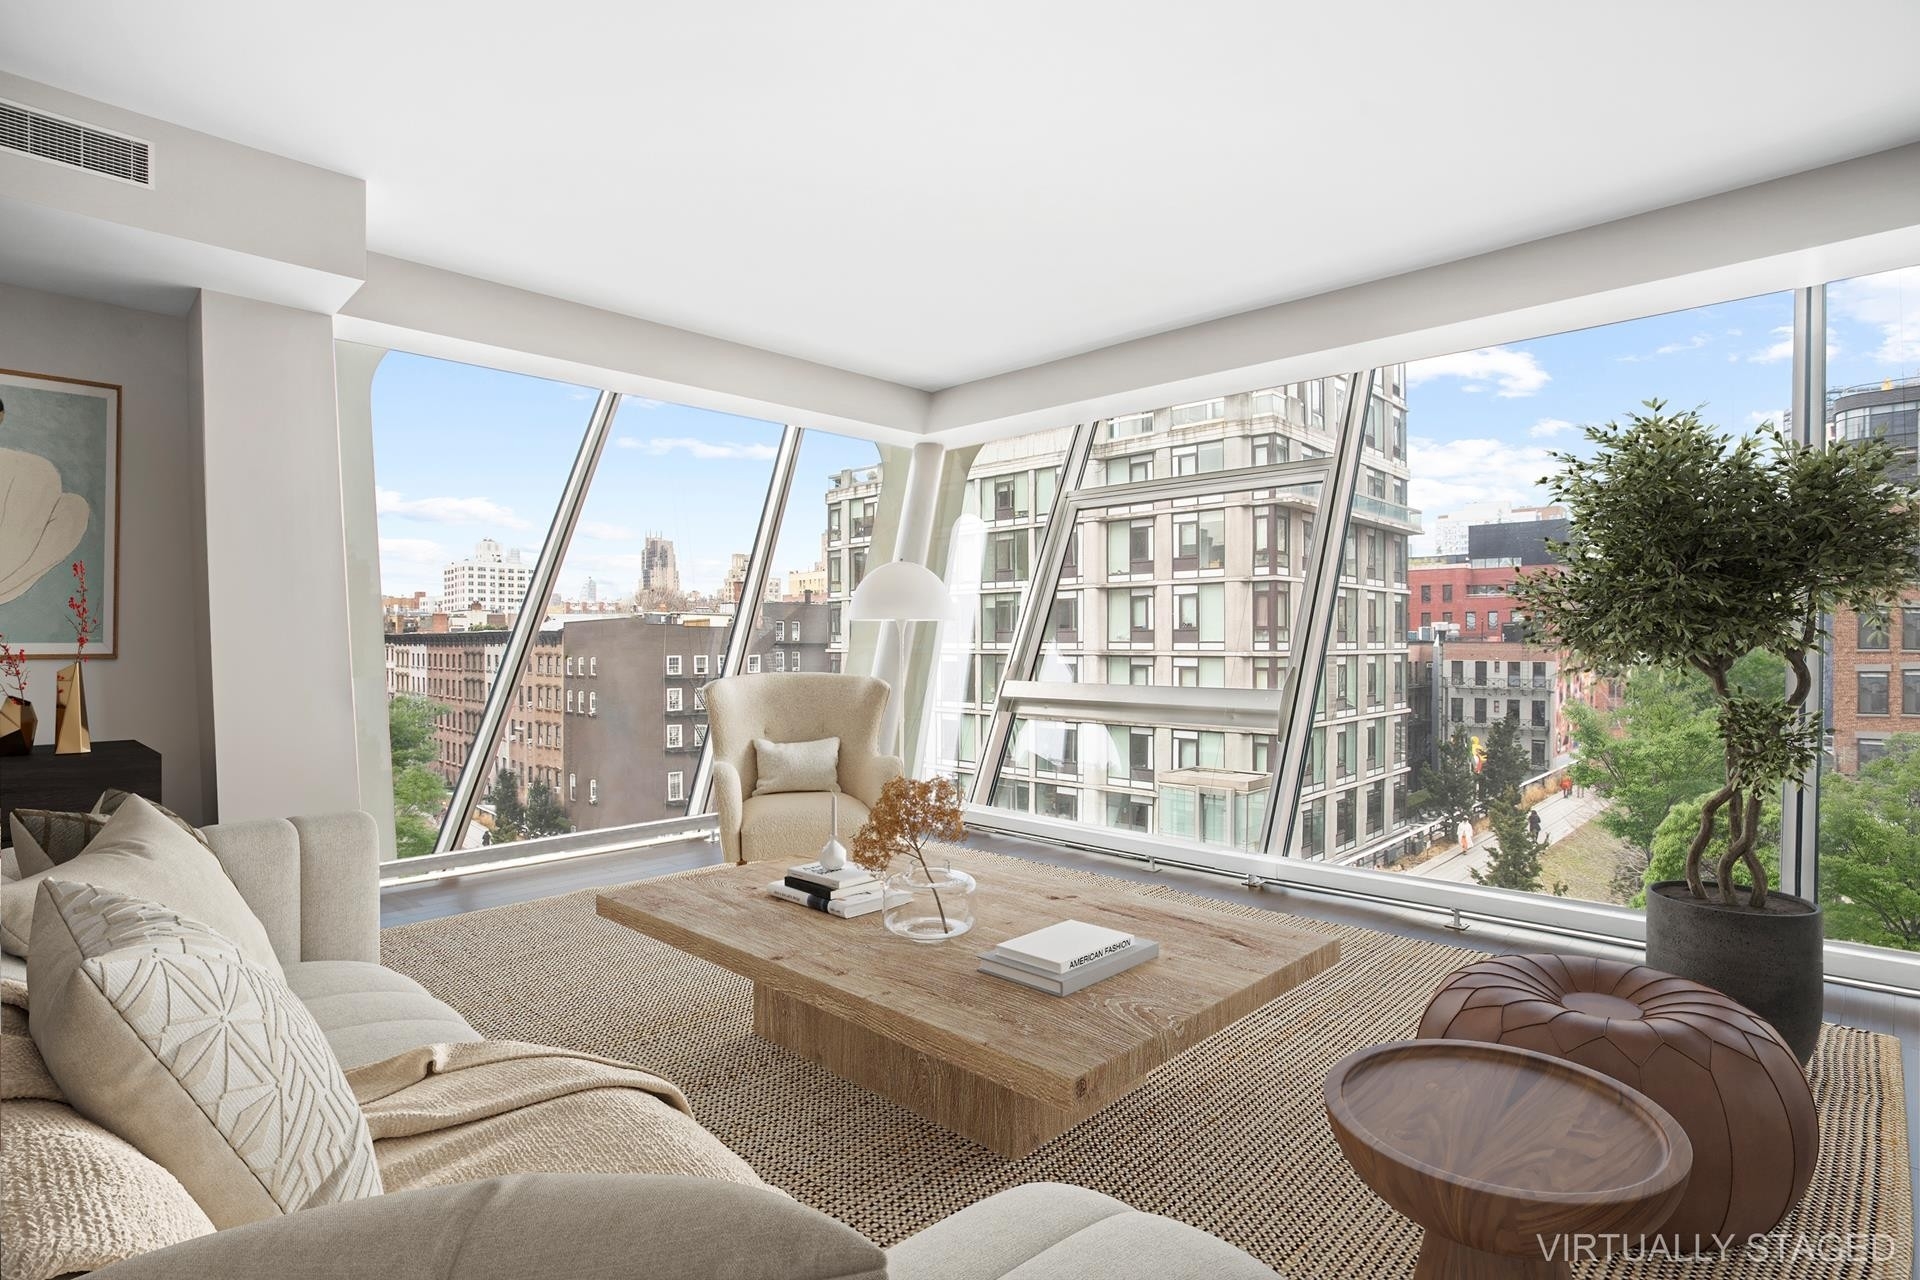 Condominium for Sale at HL23, 515 W 23RD ST, 6 Chelsea, New York, NY 10011